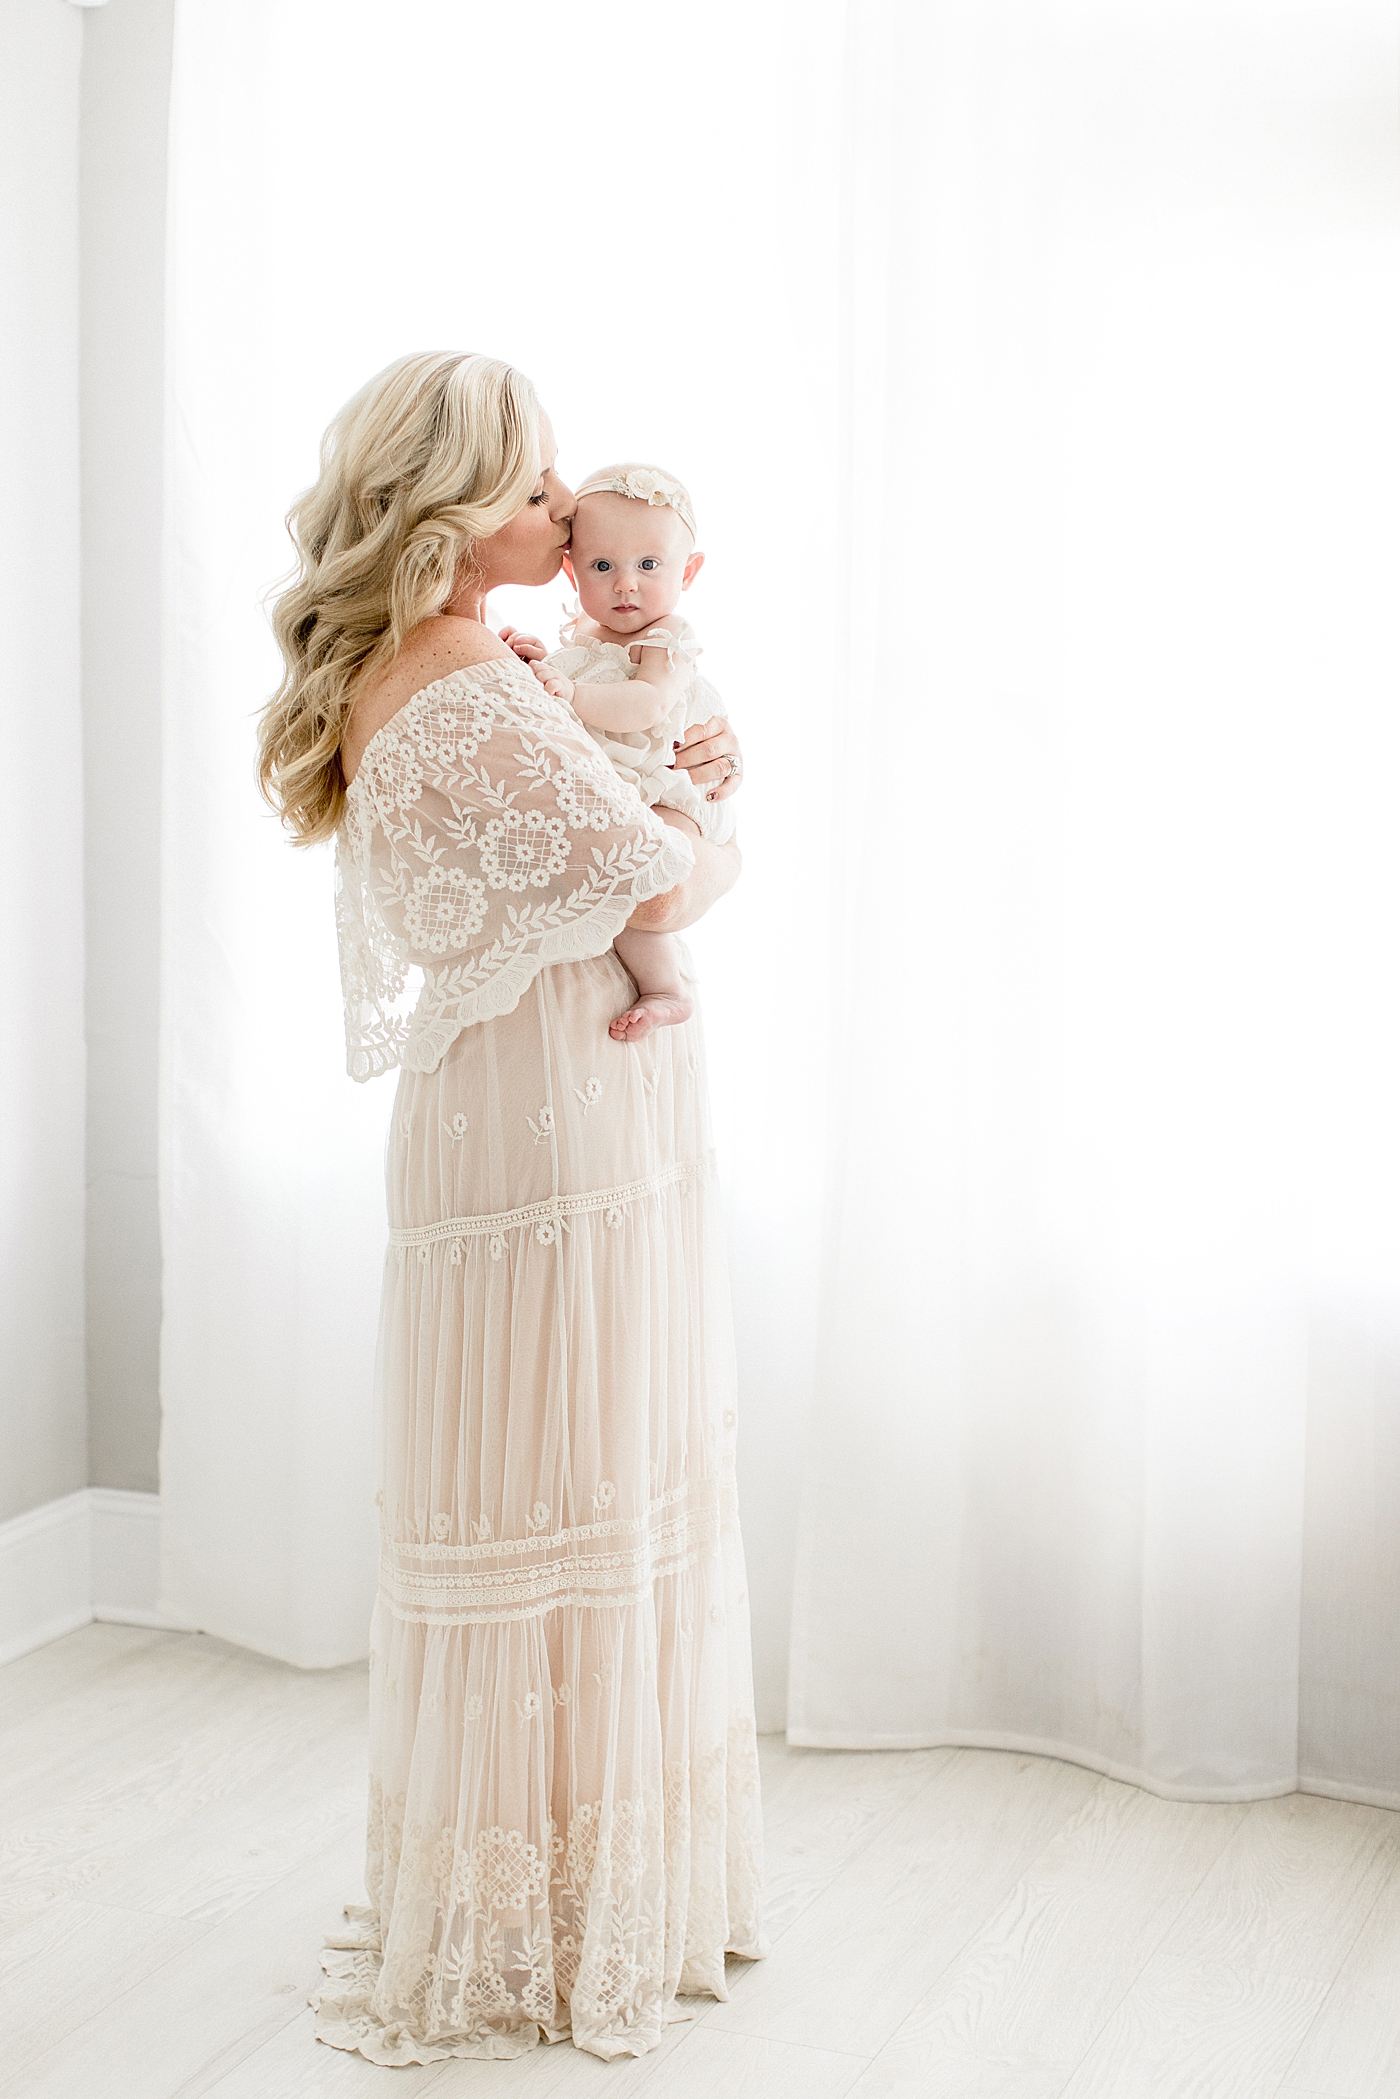 Mom and baby girl together in front of beautiful window. Photo by Tampa Photographer, Brittany Elise Photography.